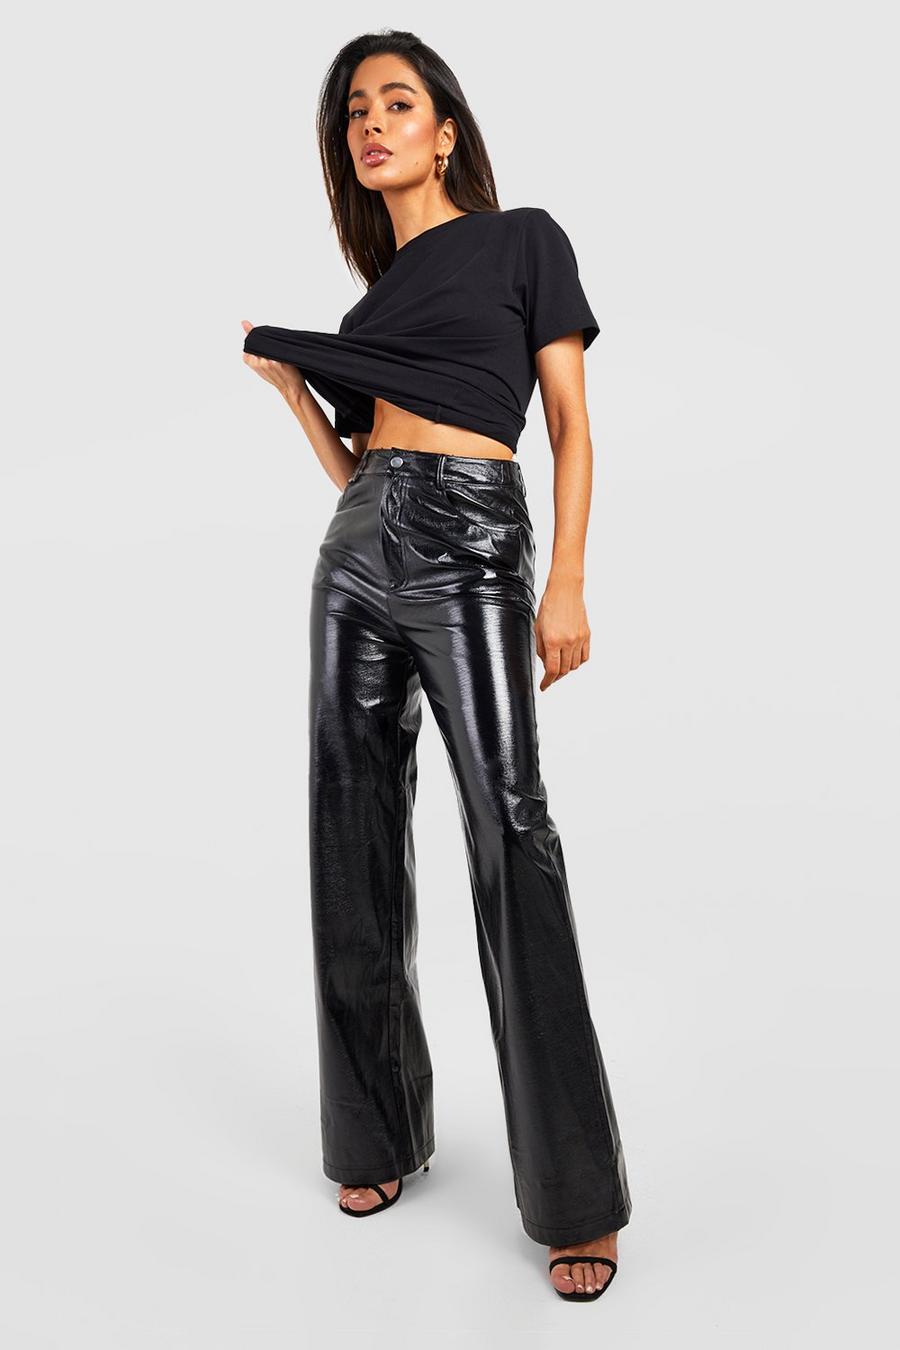 Leather Pants Women Petite High Waisted Baggy Faux Leather Pants Straight  Leg Y2K Leather Pants Tight Shiny Trousers Black at  Women's Clothing  store